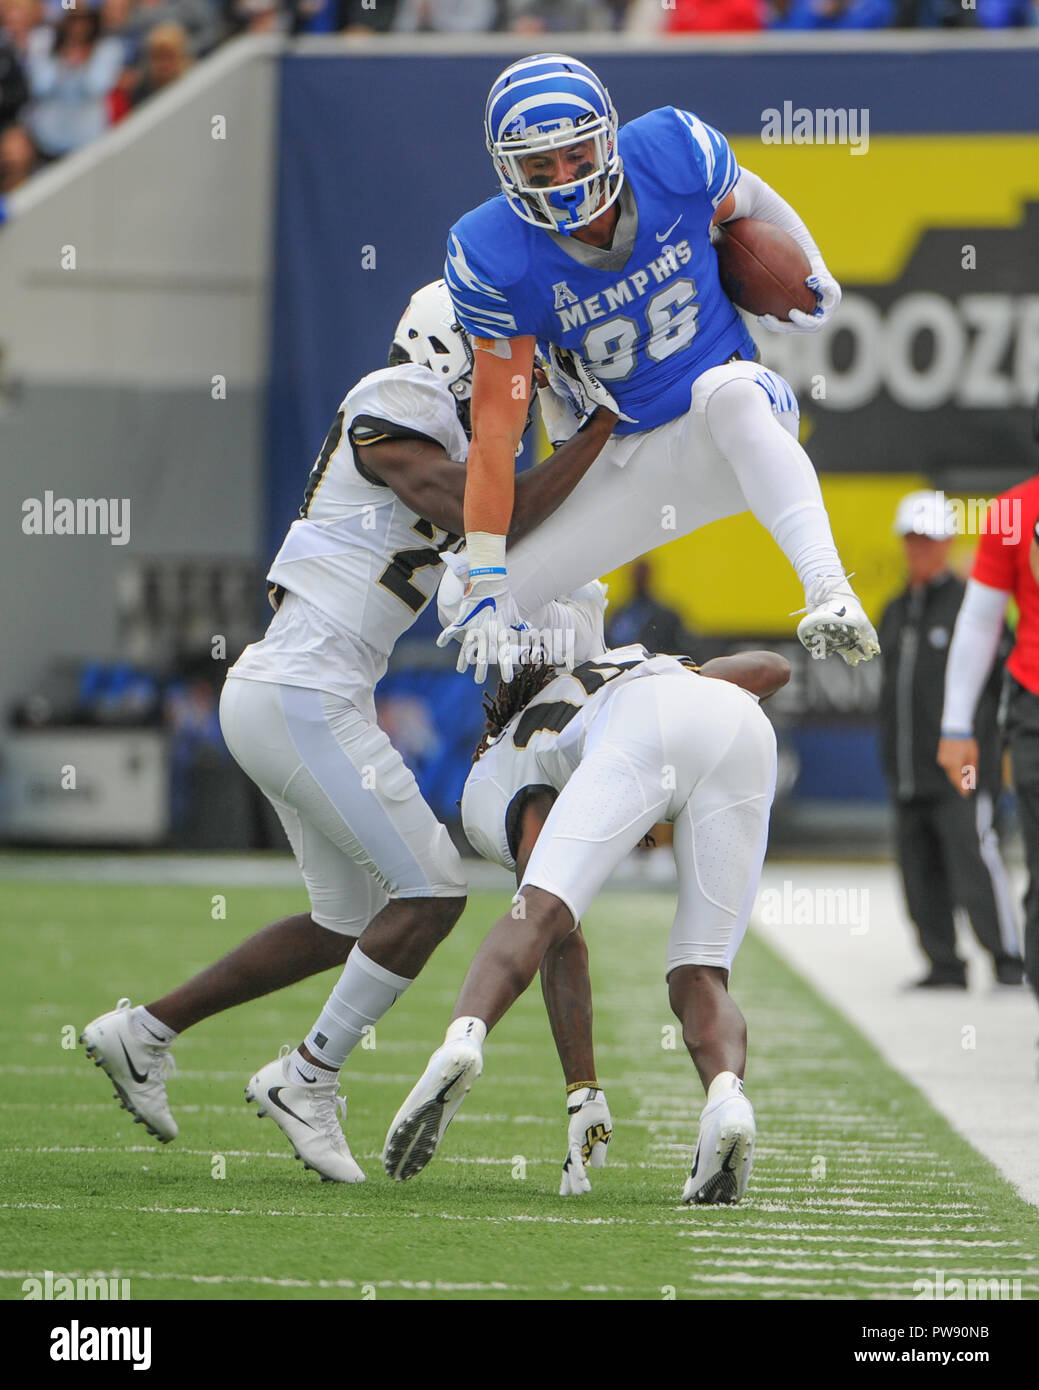 October 13, 2018: Memphis Tigers tight end, JOEY MAGNIFICO (86), jumps over UCF defenders during the NCAA football game between the Memphis Tigers and the Central Florida Knights at Liberty Bowl Stadium in Memphis, TN. Memphis leads UCF at the half, 59-22. Kevin Langley/CSM Stock Photo